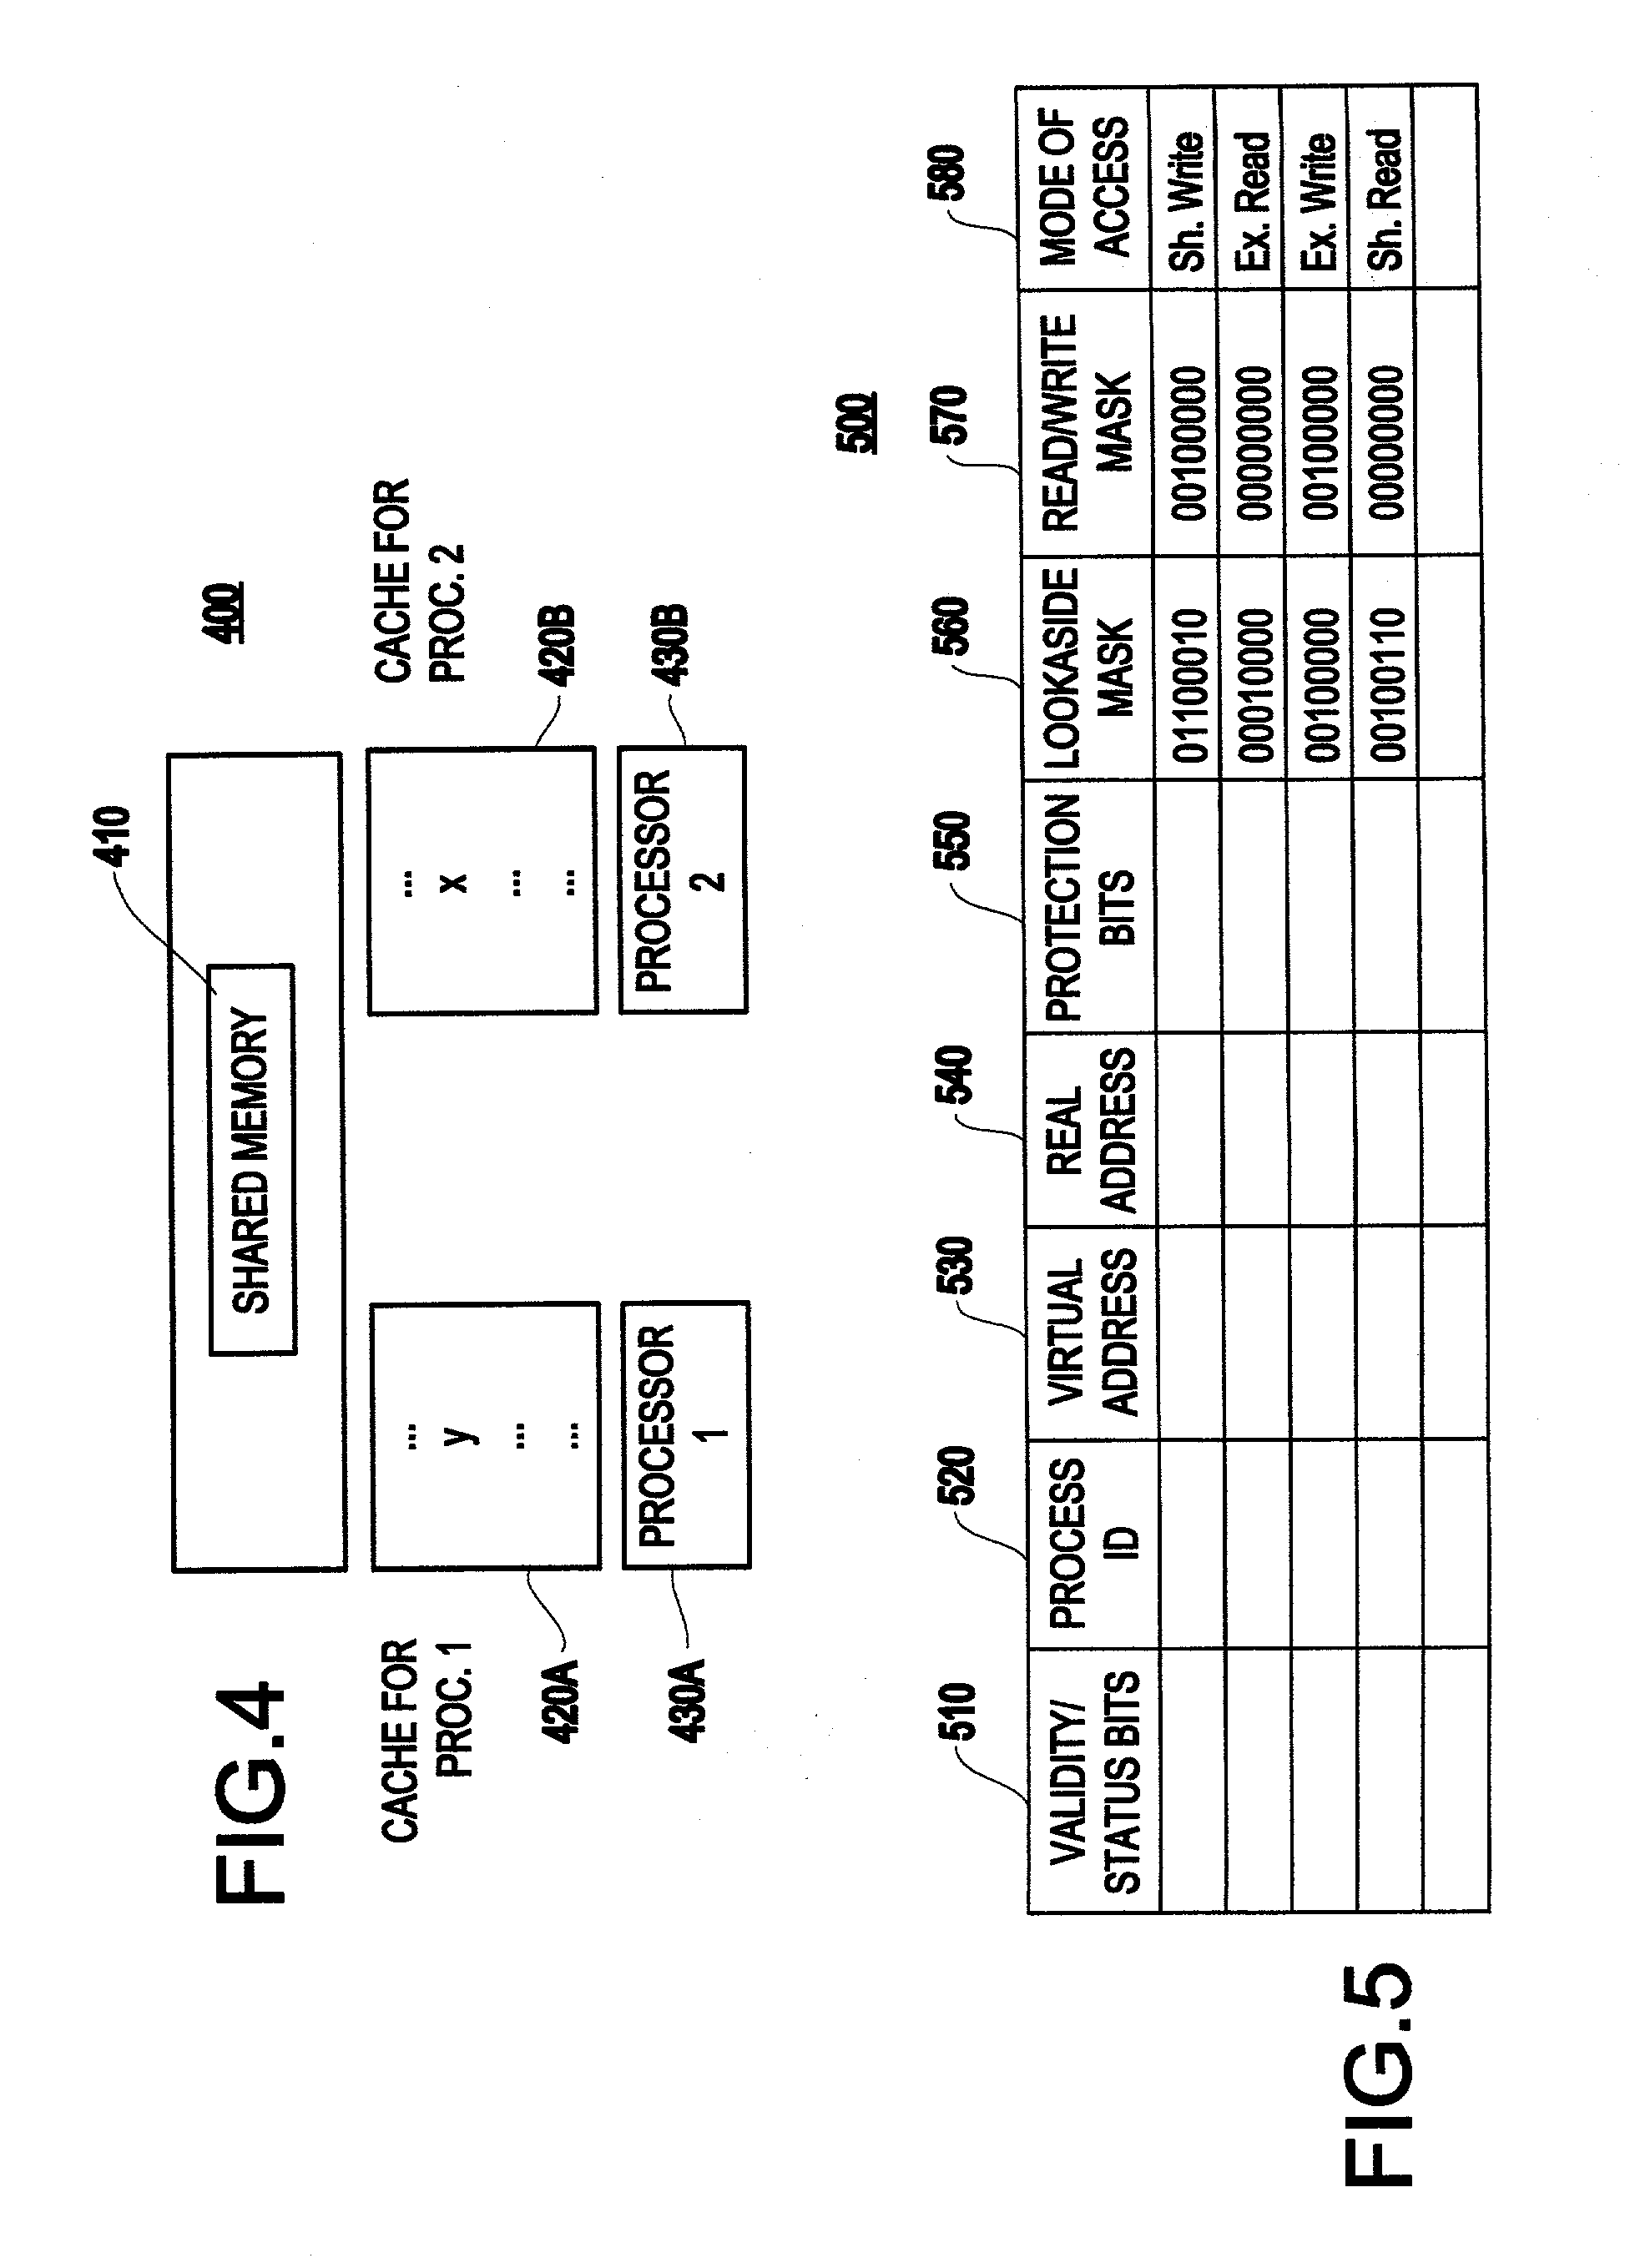 Method and system for efficient emulation of multiprocessor memory consistency